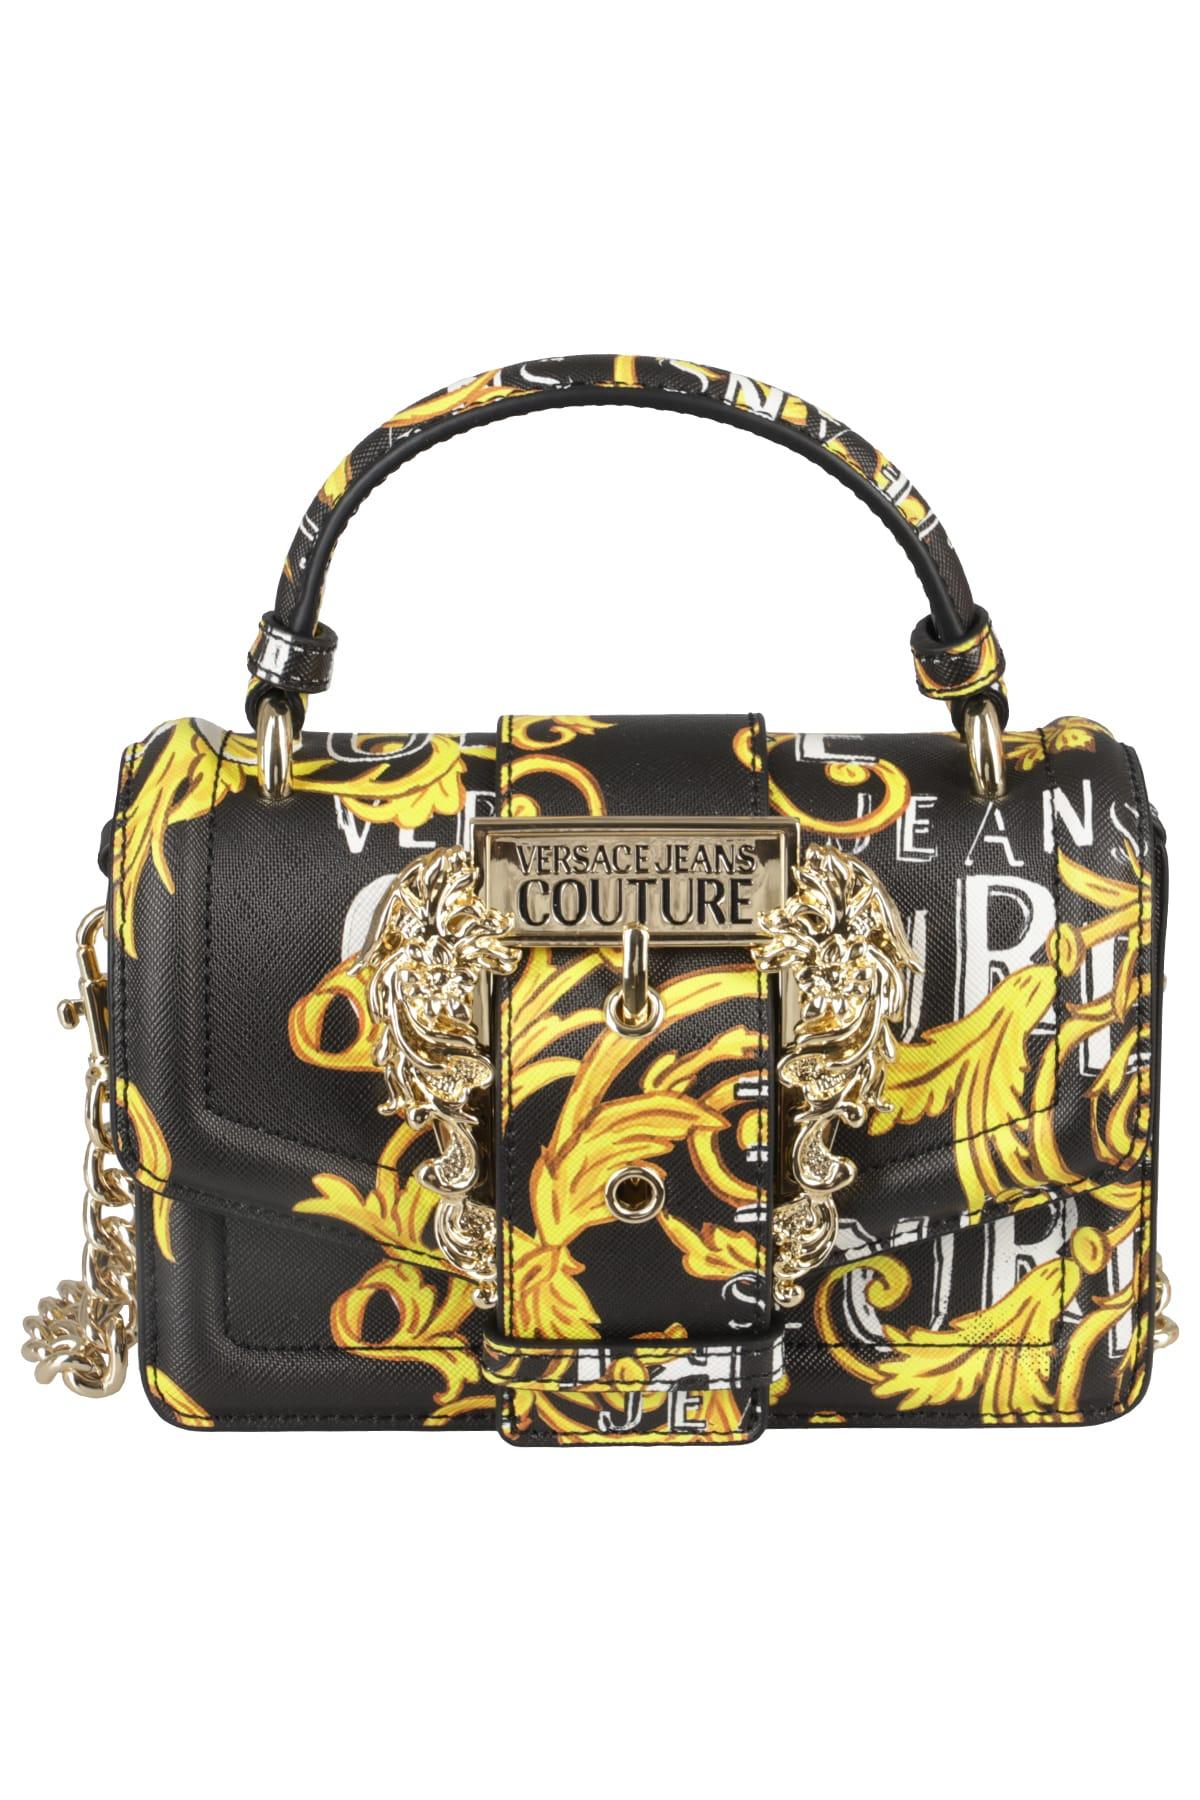 Versace Jeans Couture Regalia Baroque-printed Chain-linked Shoulder Bag in  Black | Lyst